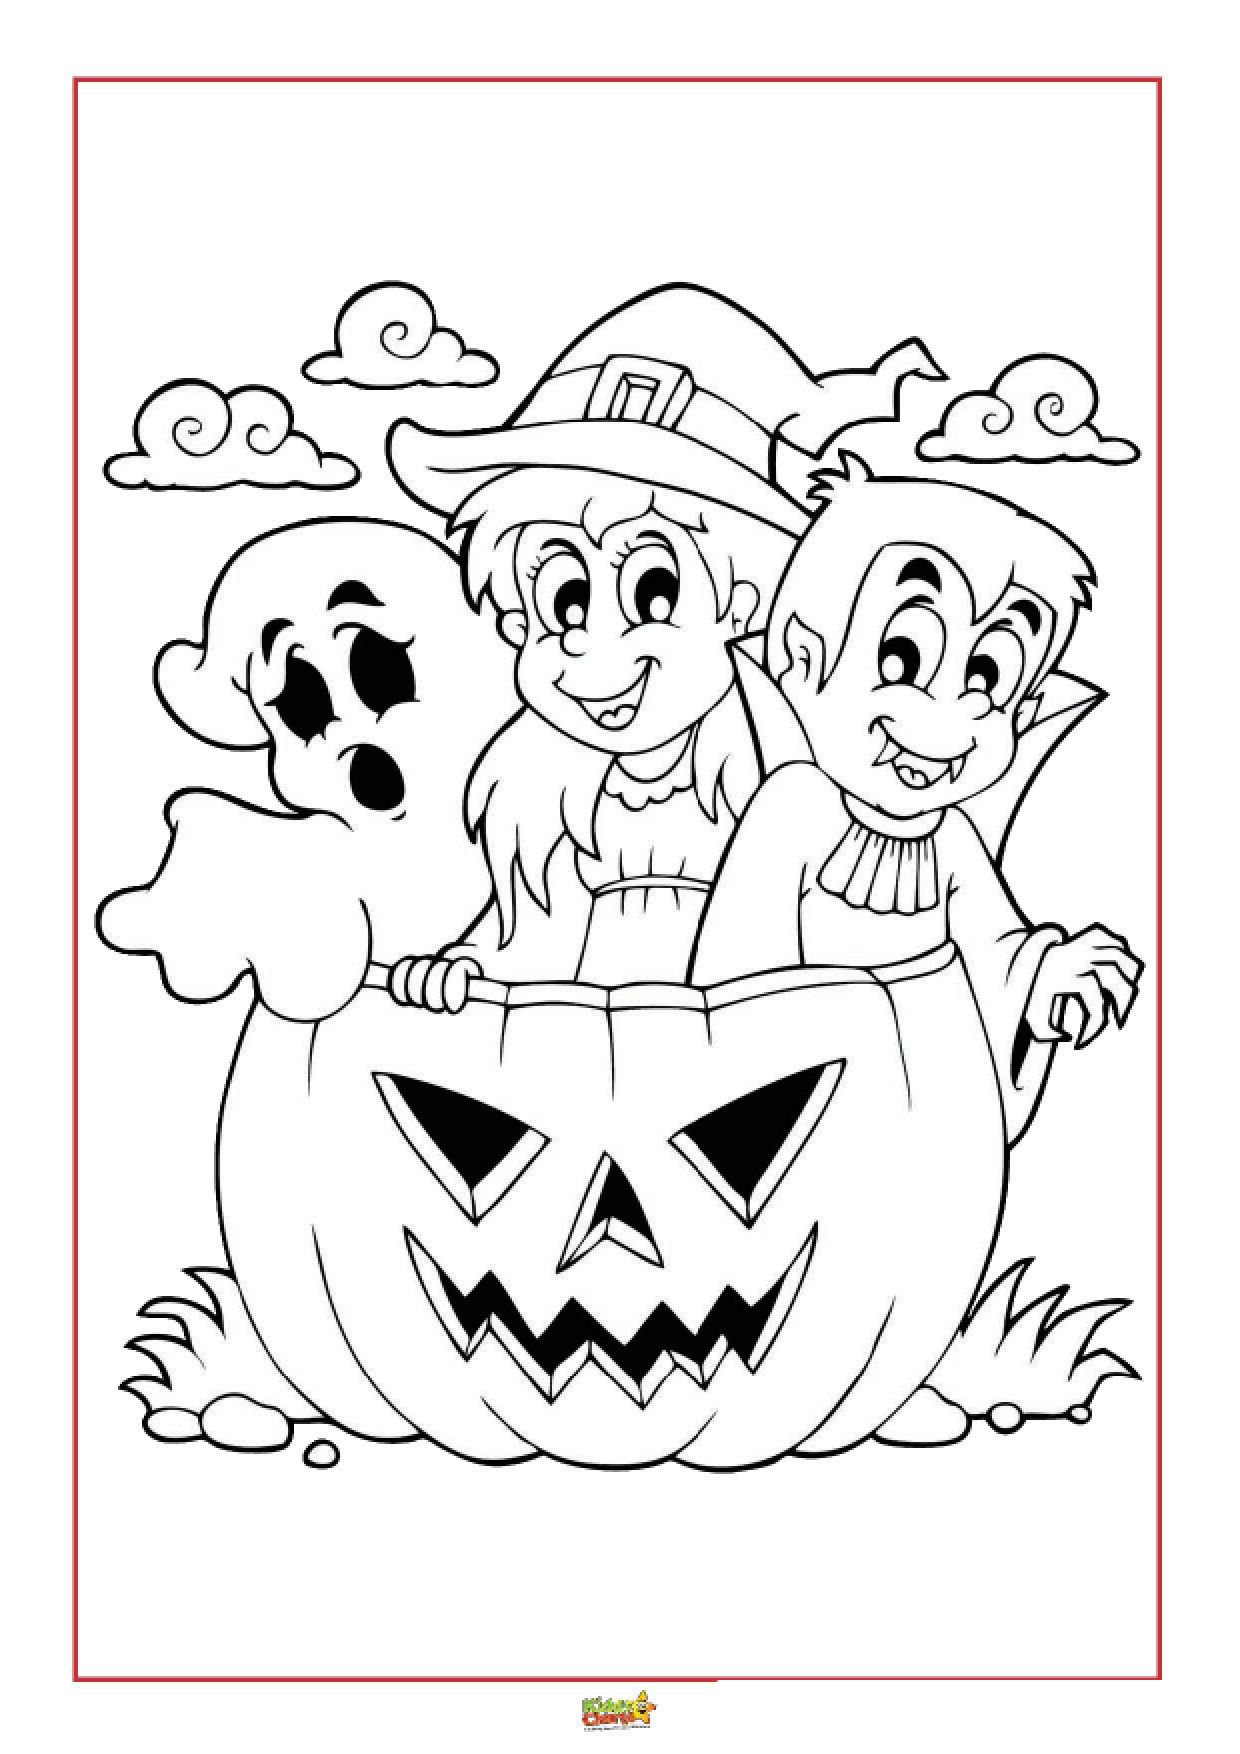 Halloween Colouring Pages for Kids - kiddycharts.com